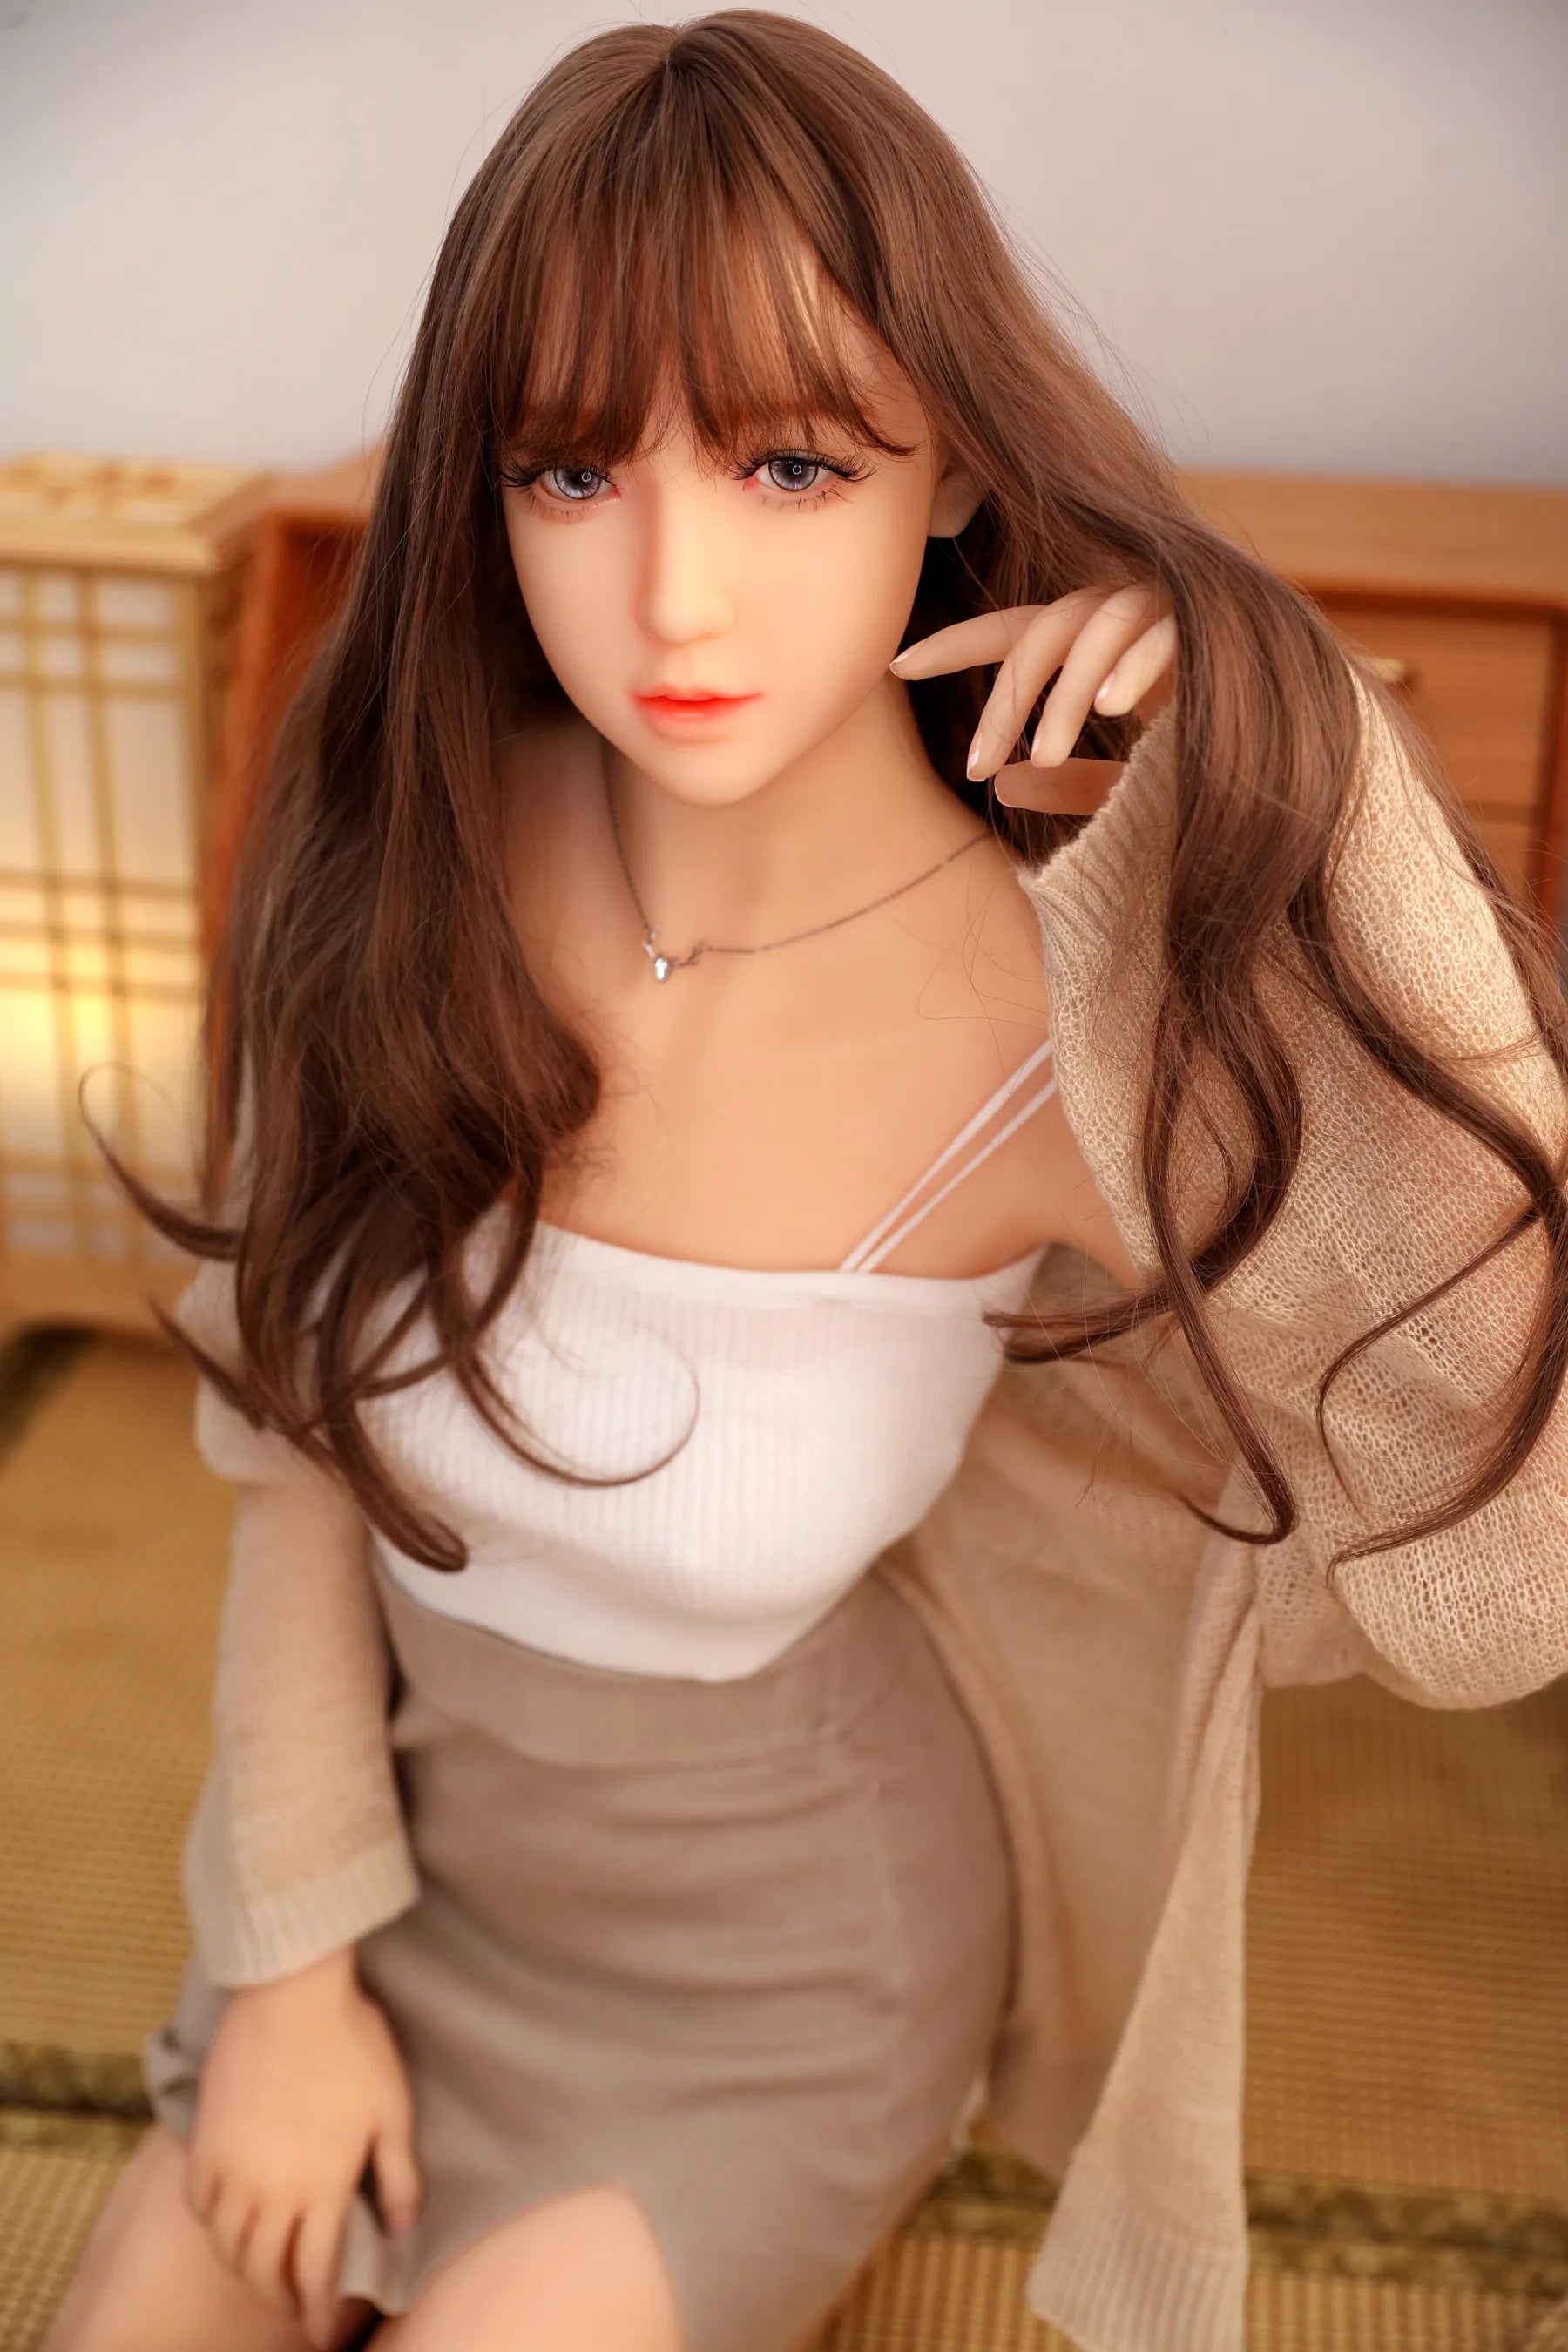 In Stock 5.18ft/158cm Real Sex Doll - Adrianna